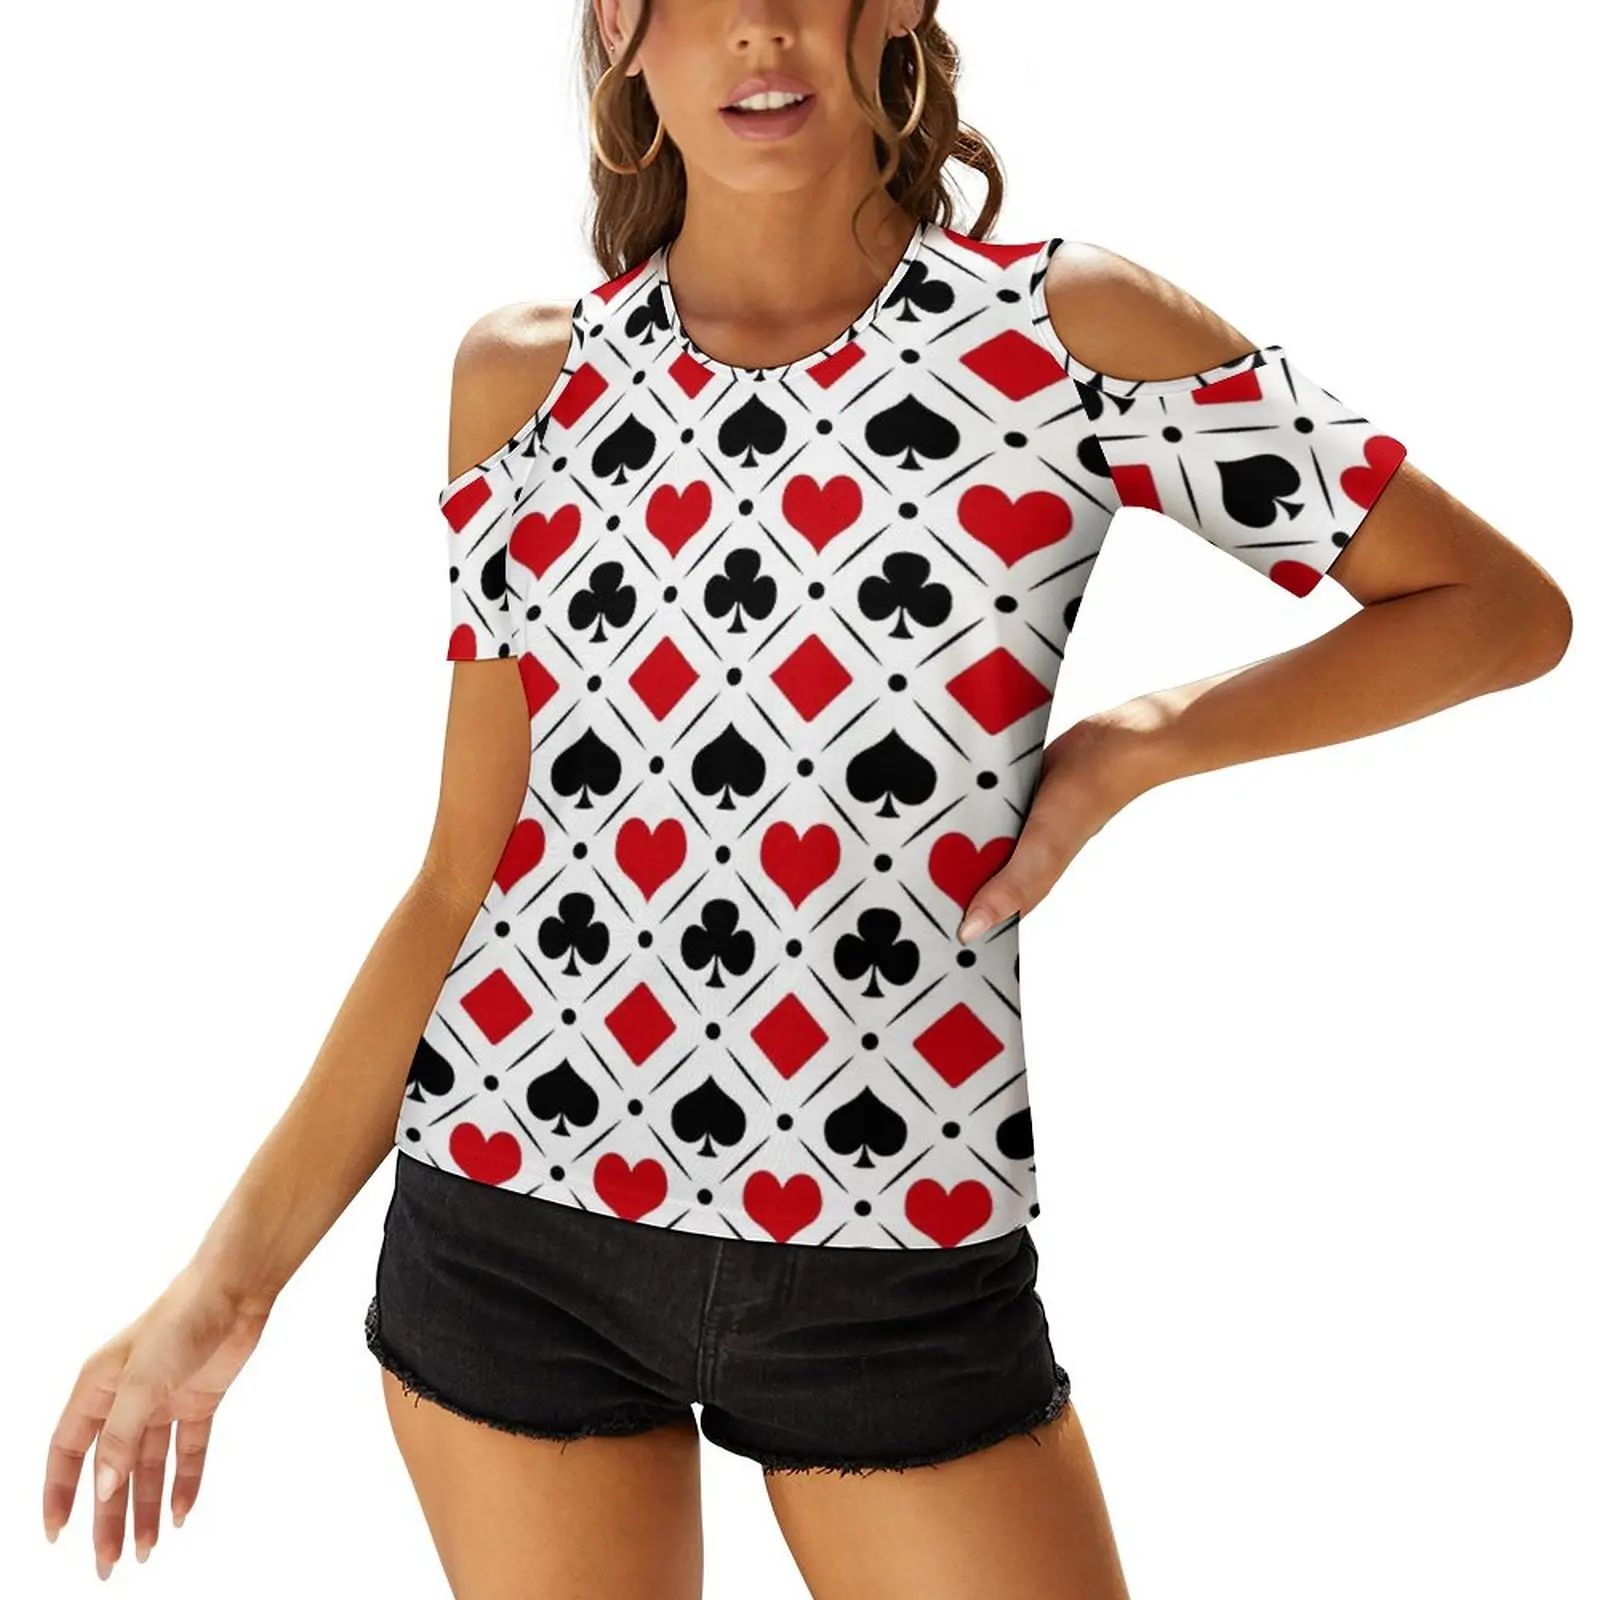 Poker Symbols T Shirts Playing Card Suits Casual T-Shirt Short Sleeve Short Sleeve Print Tshirt Pretty Woman Oversized Tops